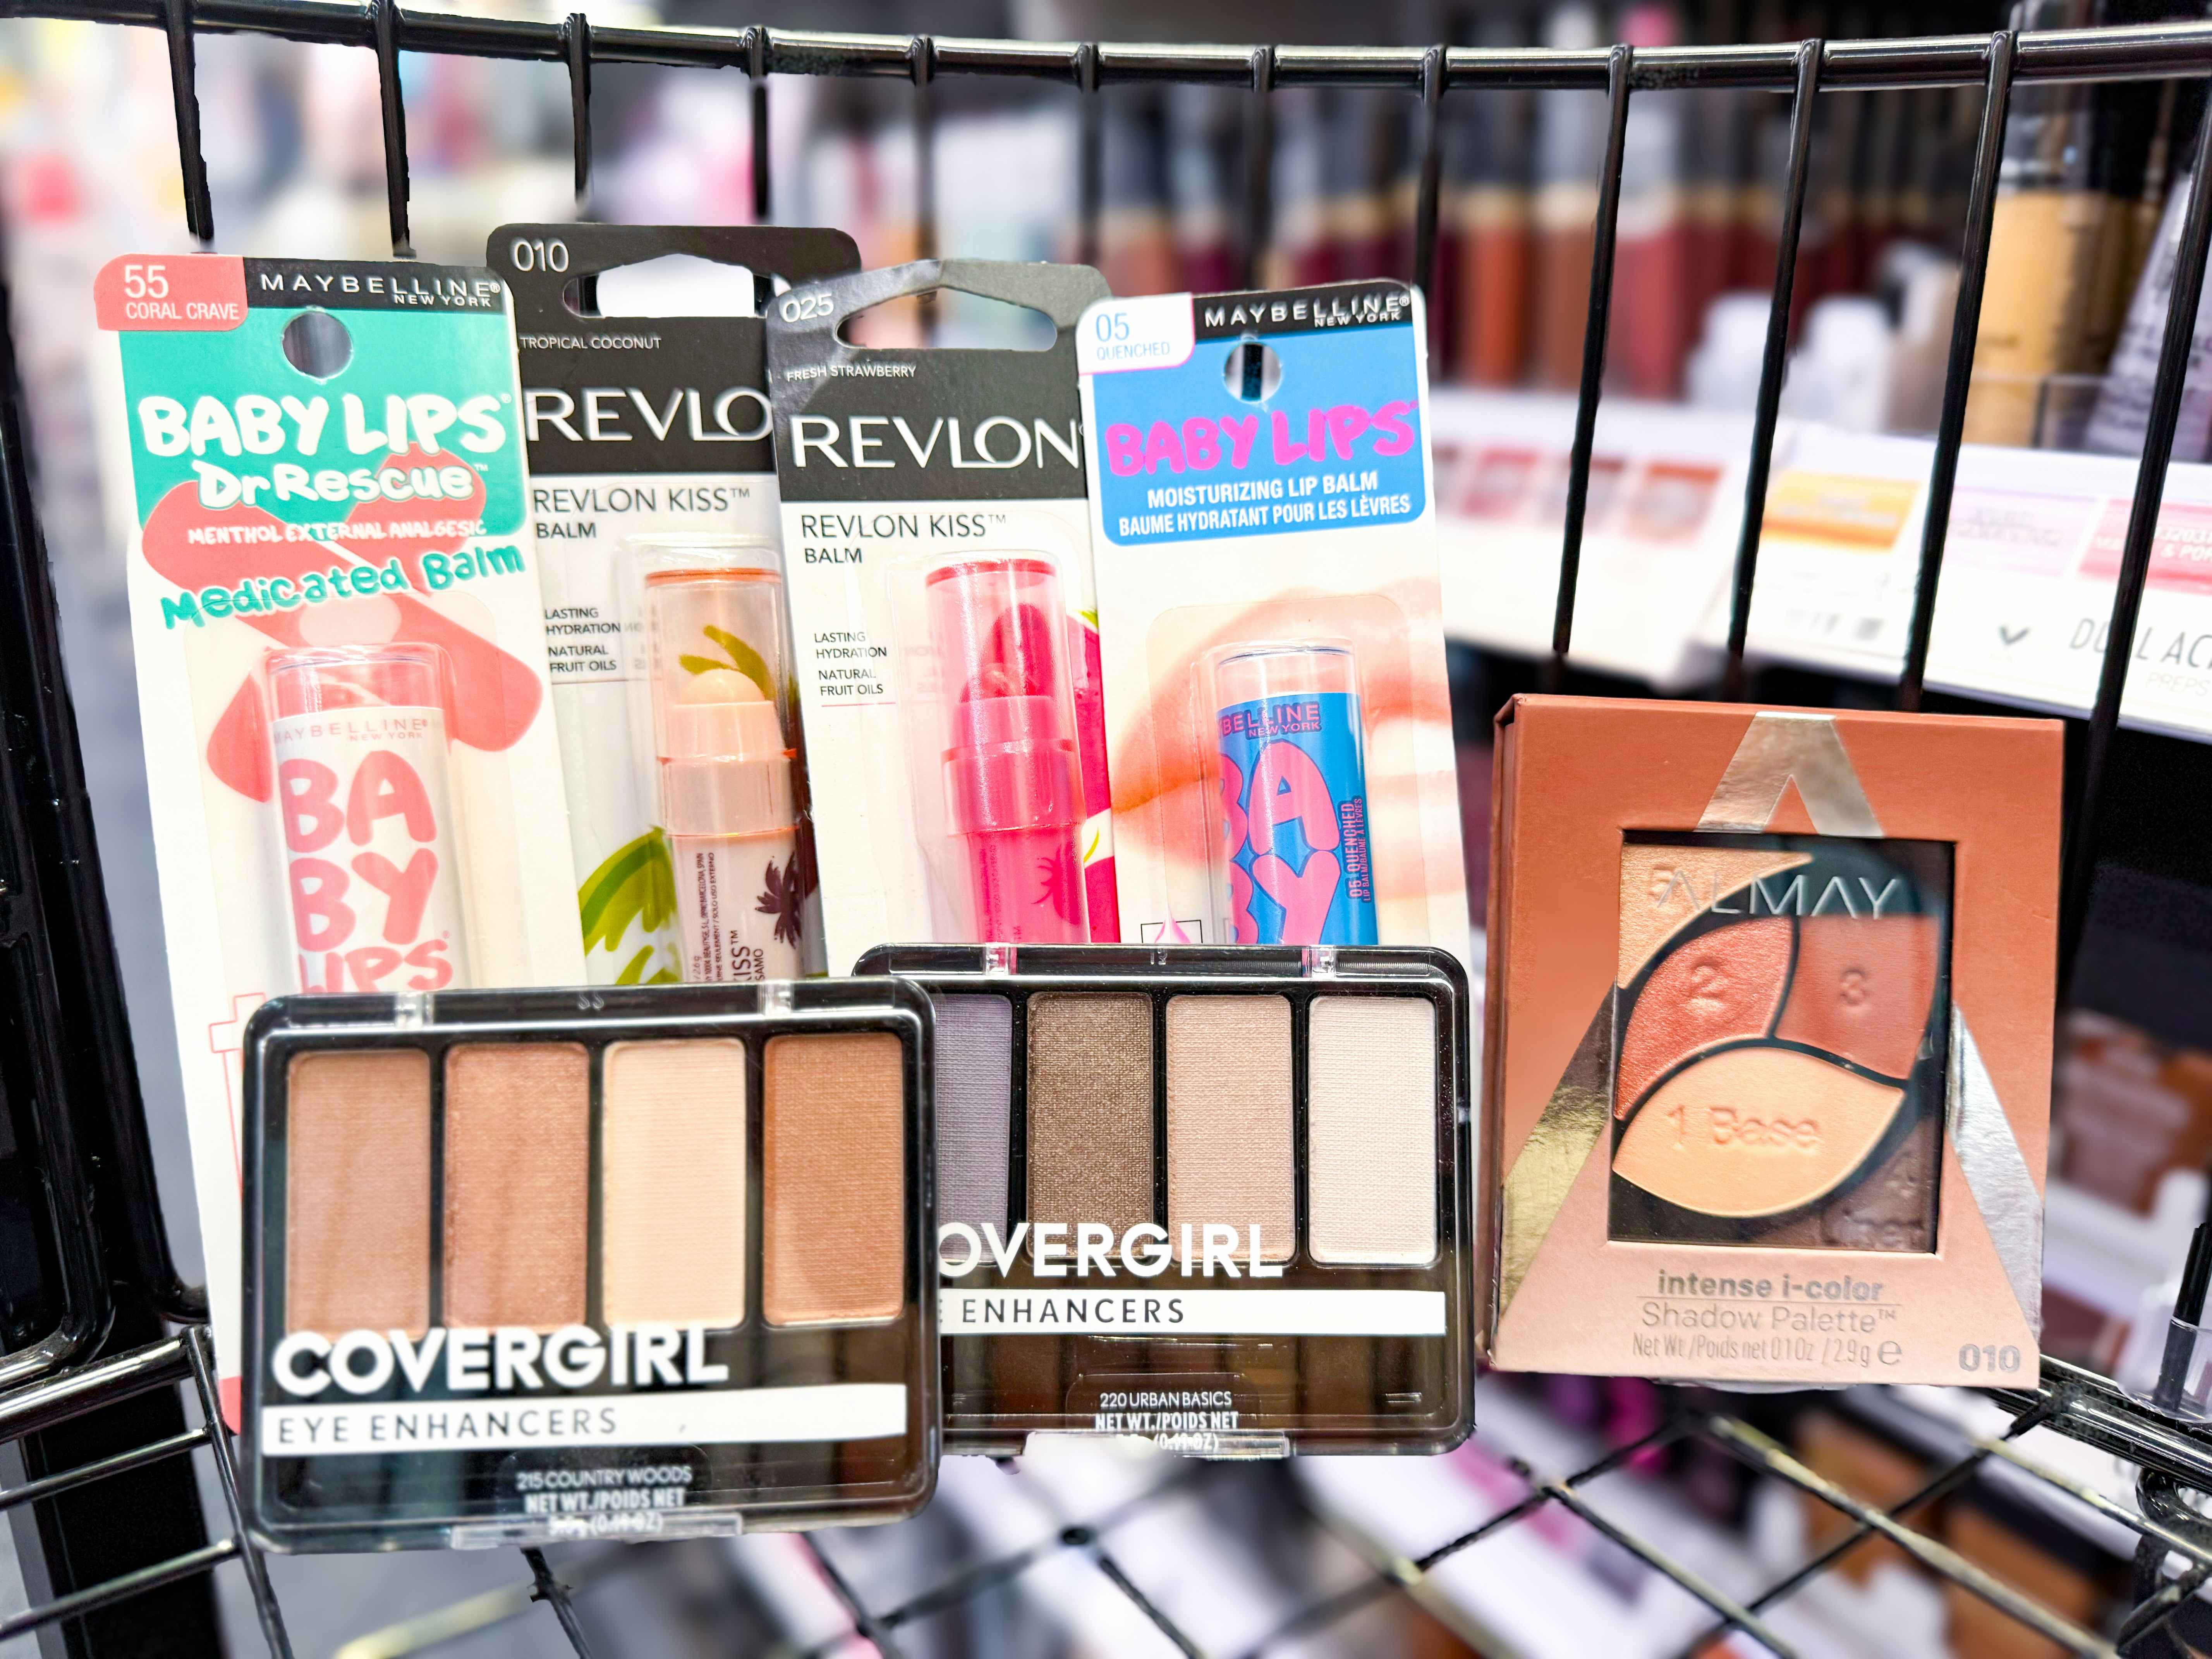 Free Maybelline, Covergirl, Almay, and Revlon Makeup at CVS ($51 Value)